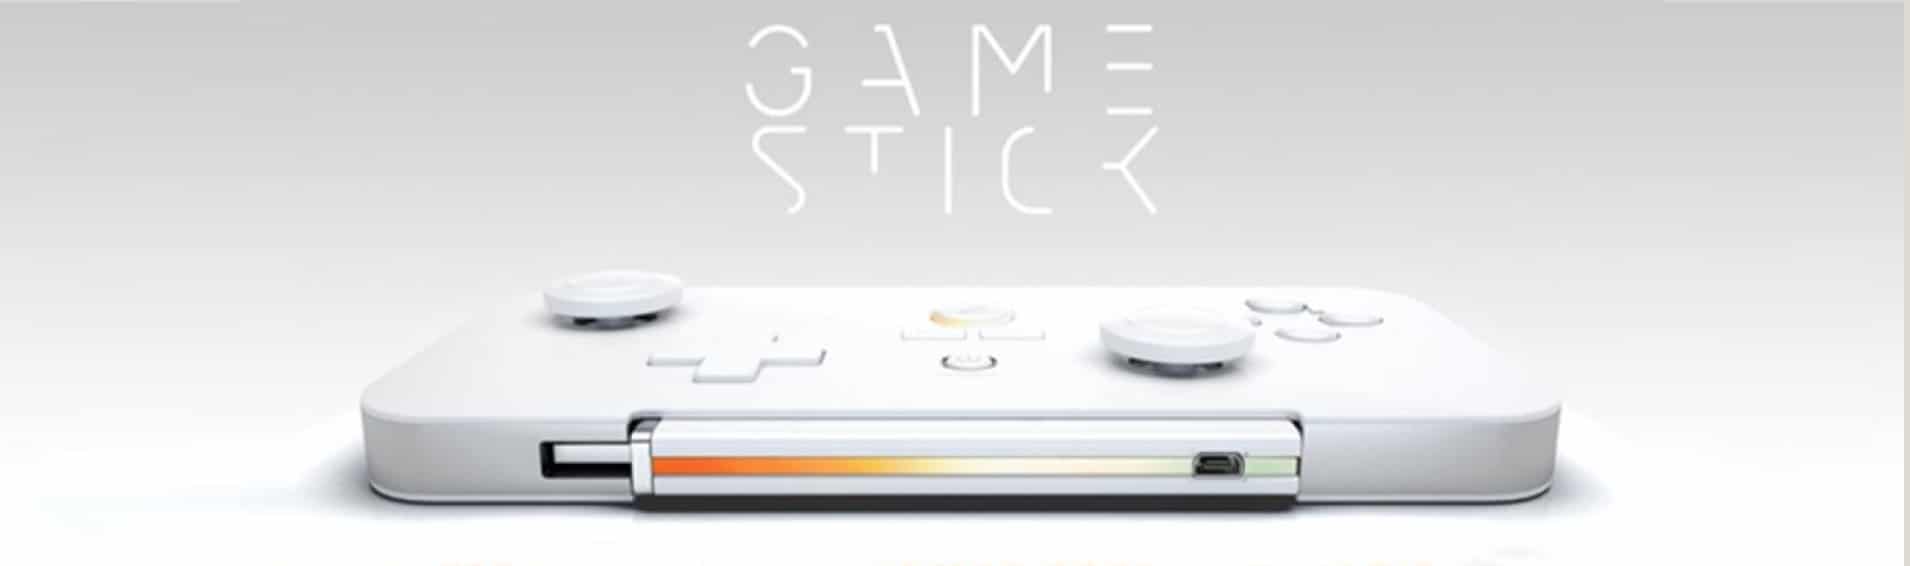 GameStick: An Affordable Android Console Alternative for Kids?